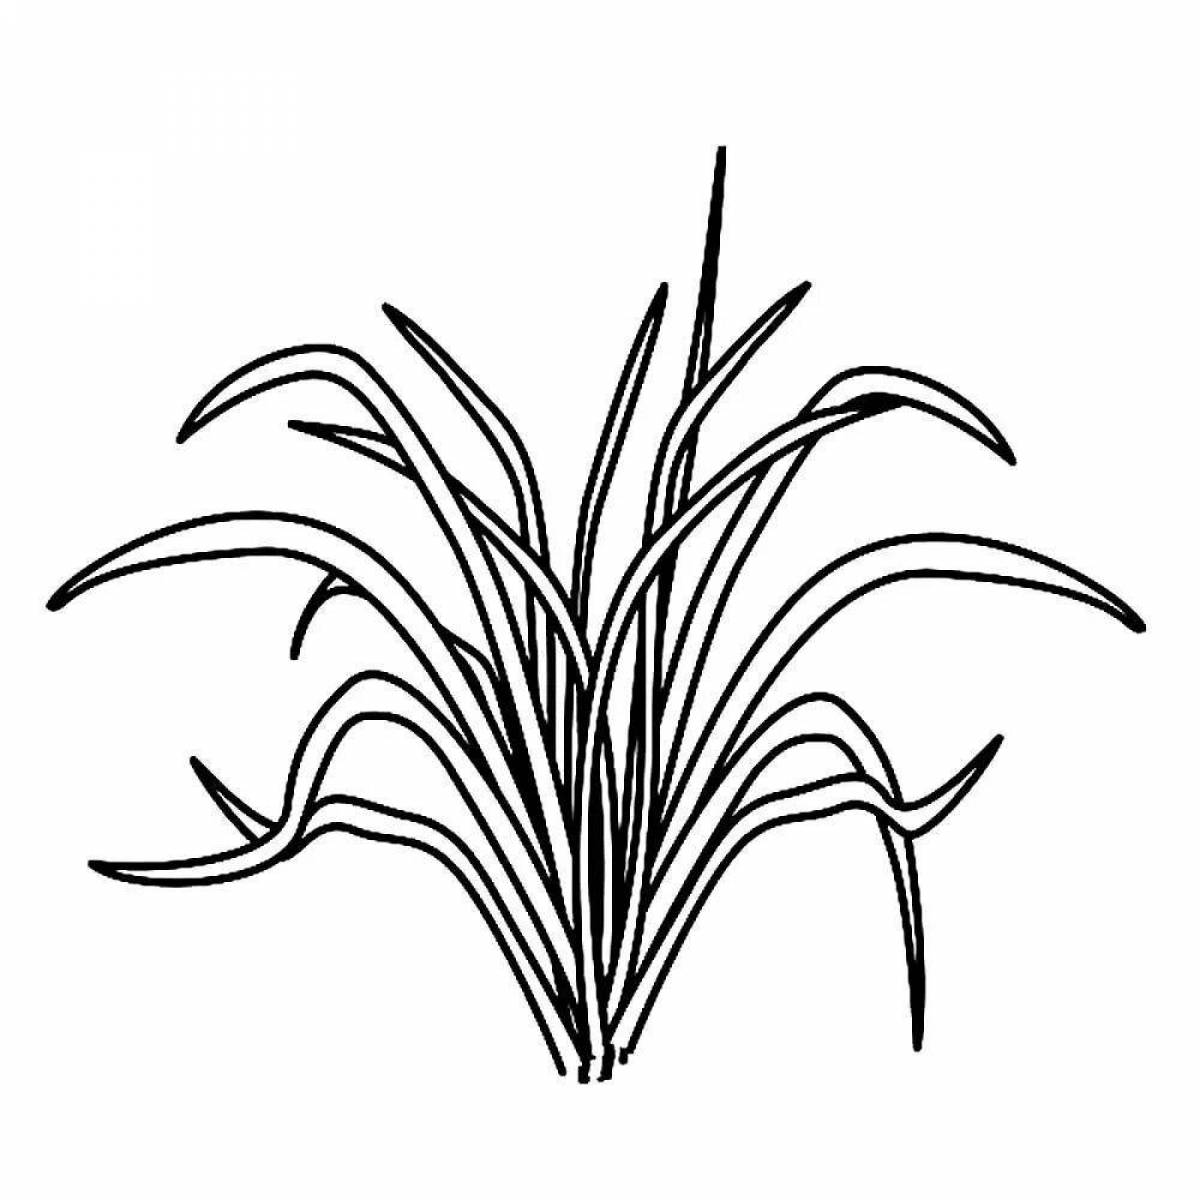 Animated grass coloring page for kids